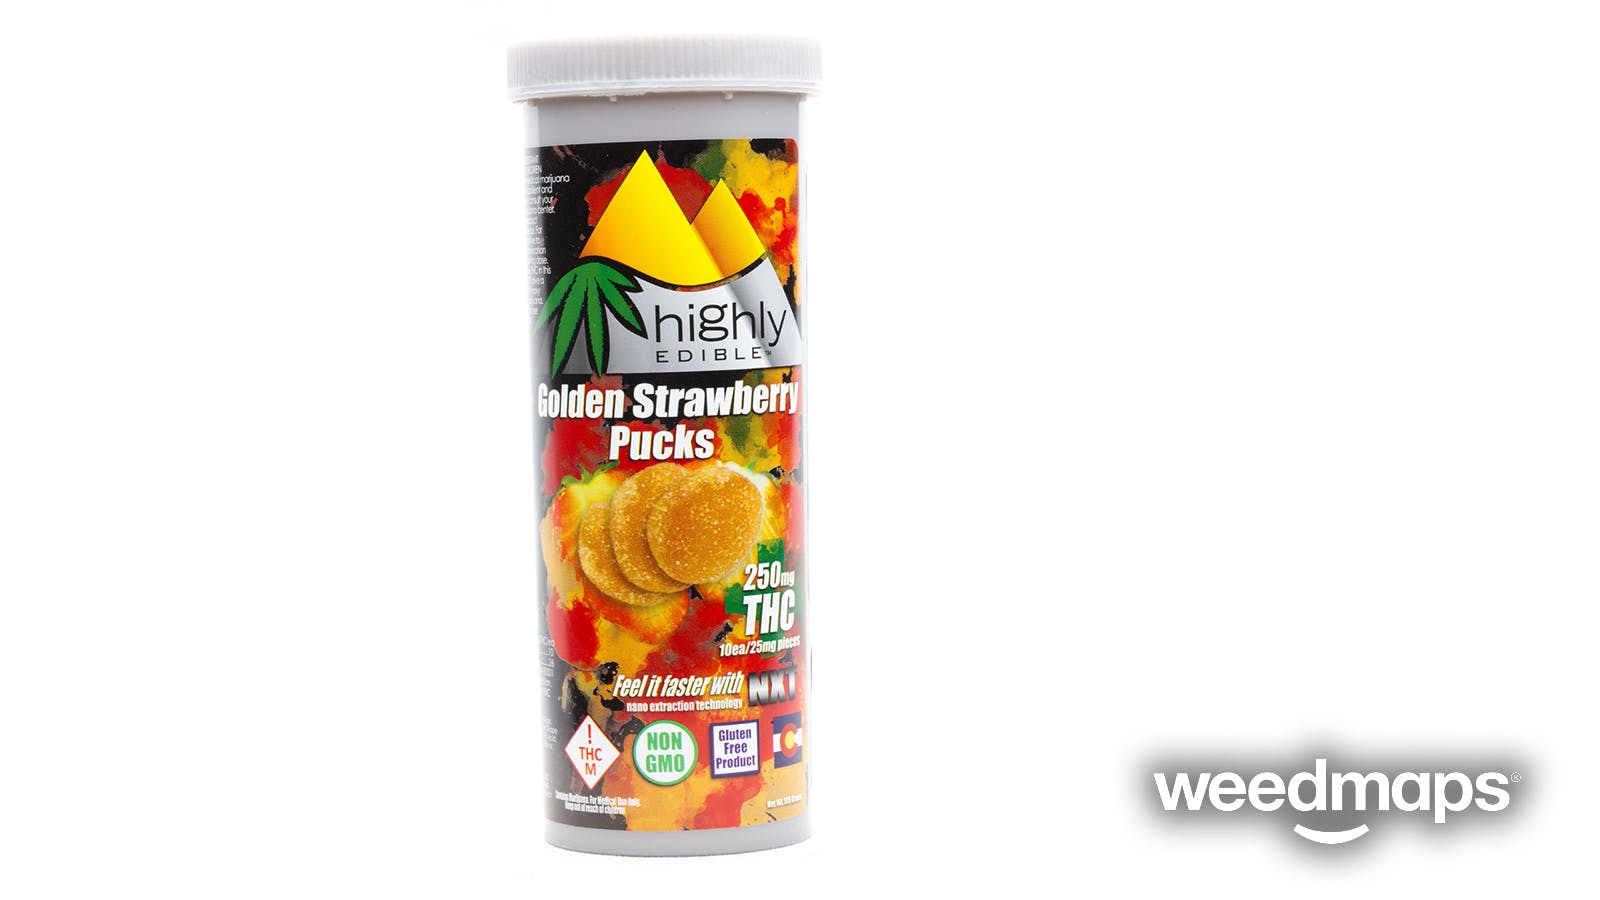 edible-highly-edibles-assorted-sour-pucks